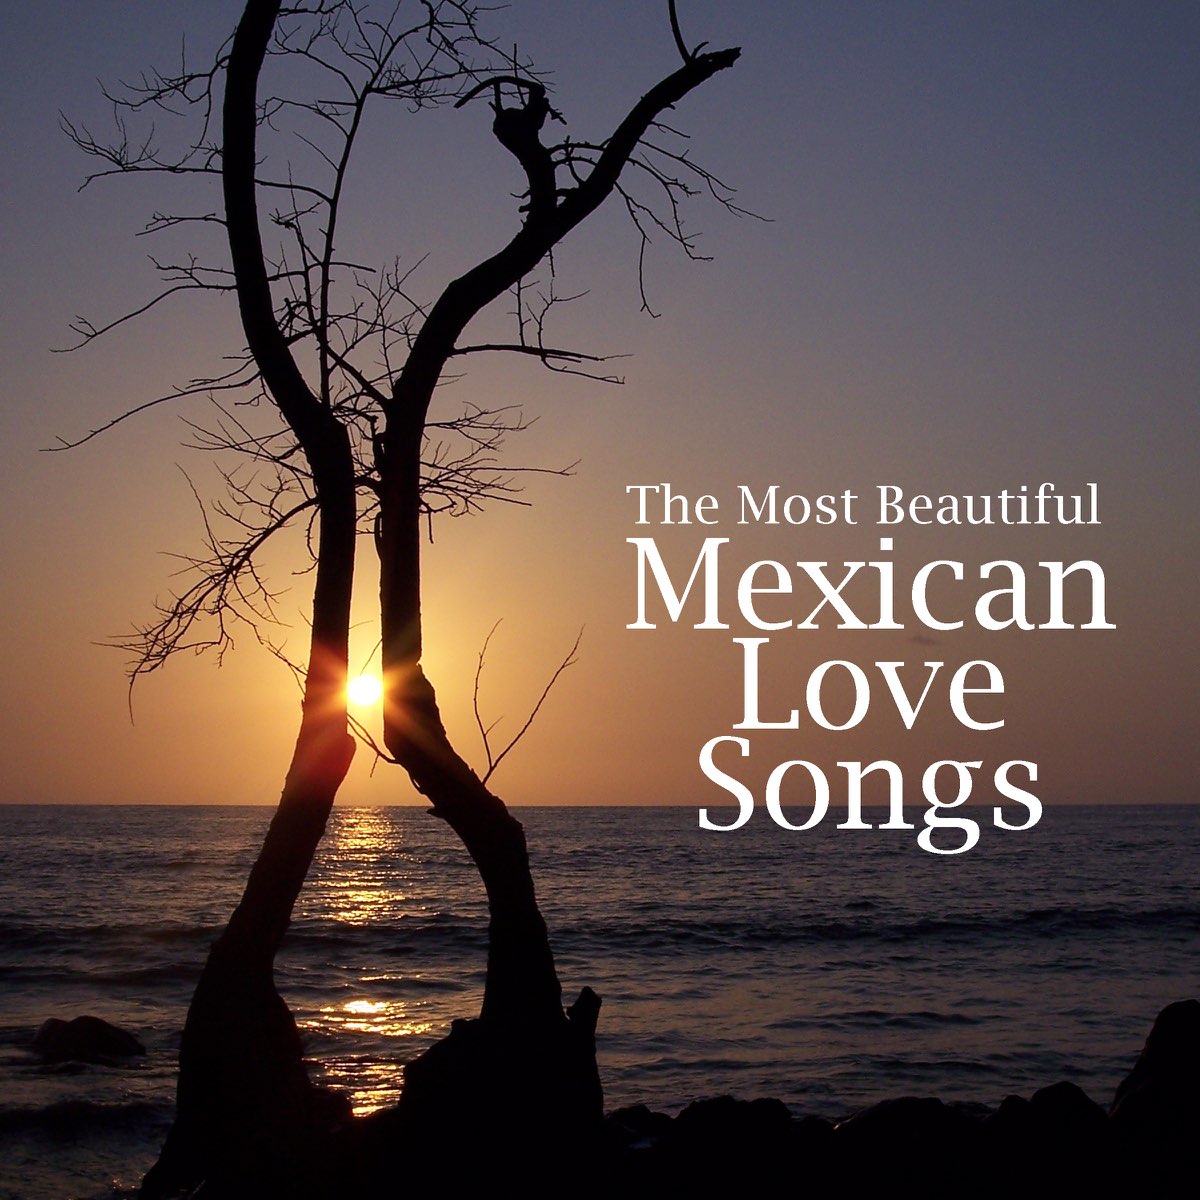 ‎The Most Beautiful Mexican Love Songs, Vol. 2 by Los Intis on Apple Music